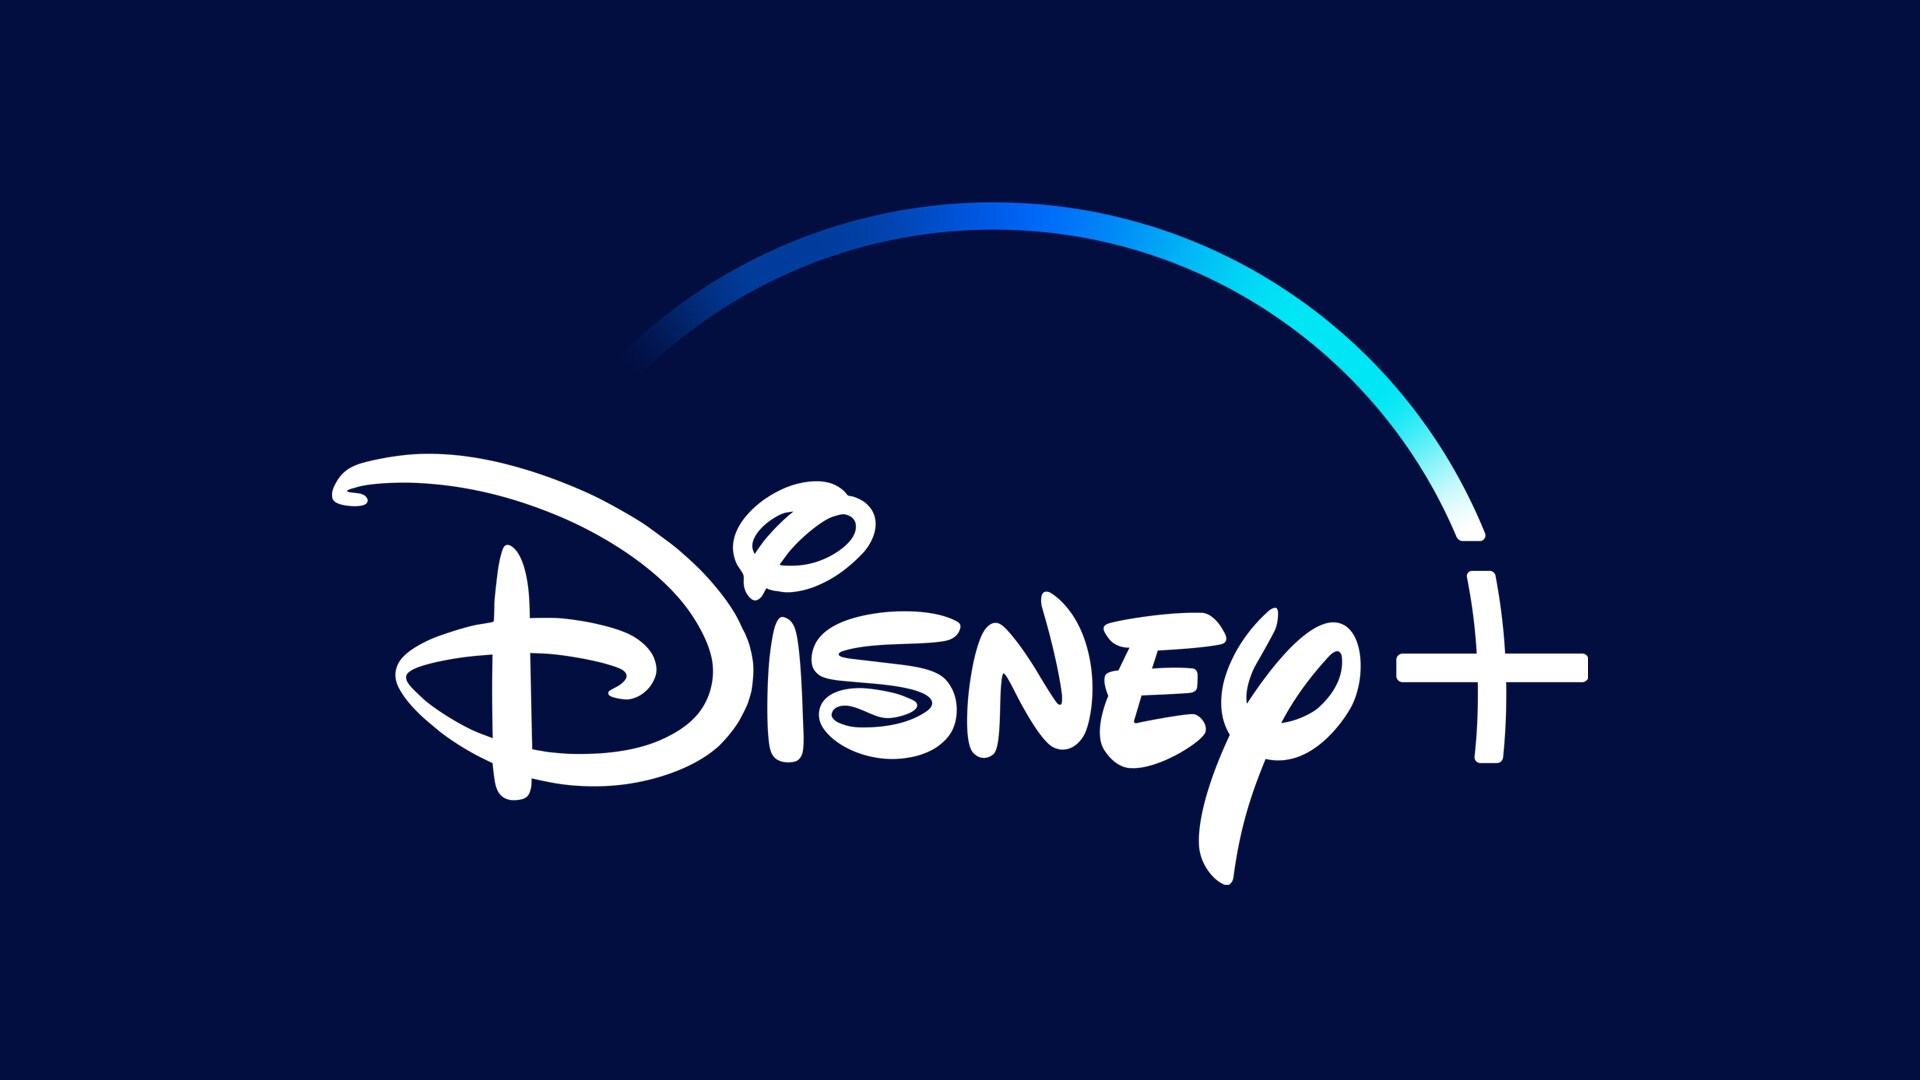 Disney+ Available In 60 Countries Across Europe, Middle East And Africa This Week 